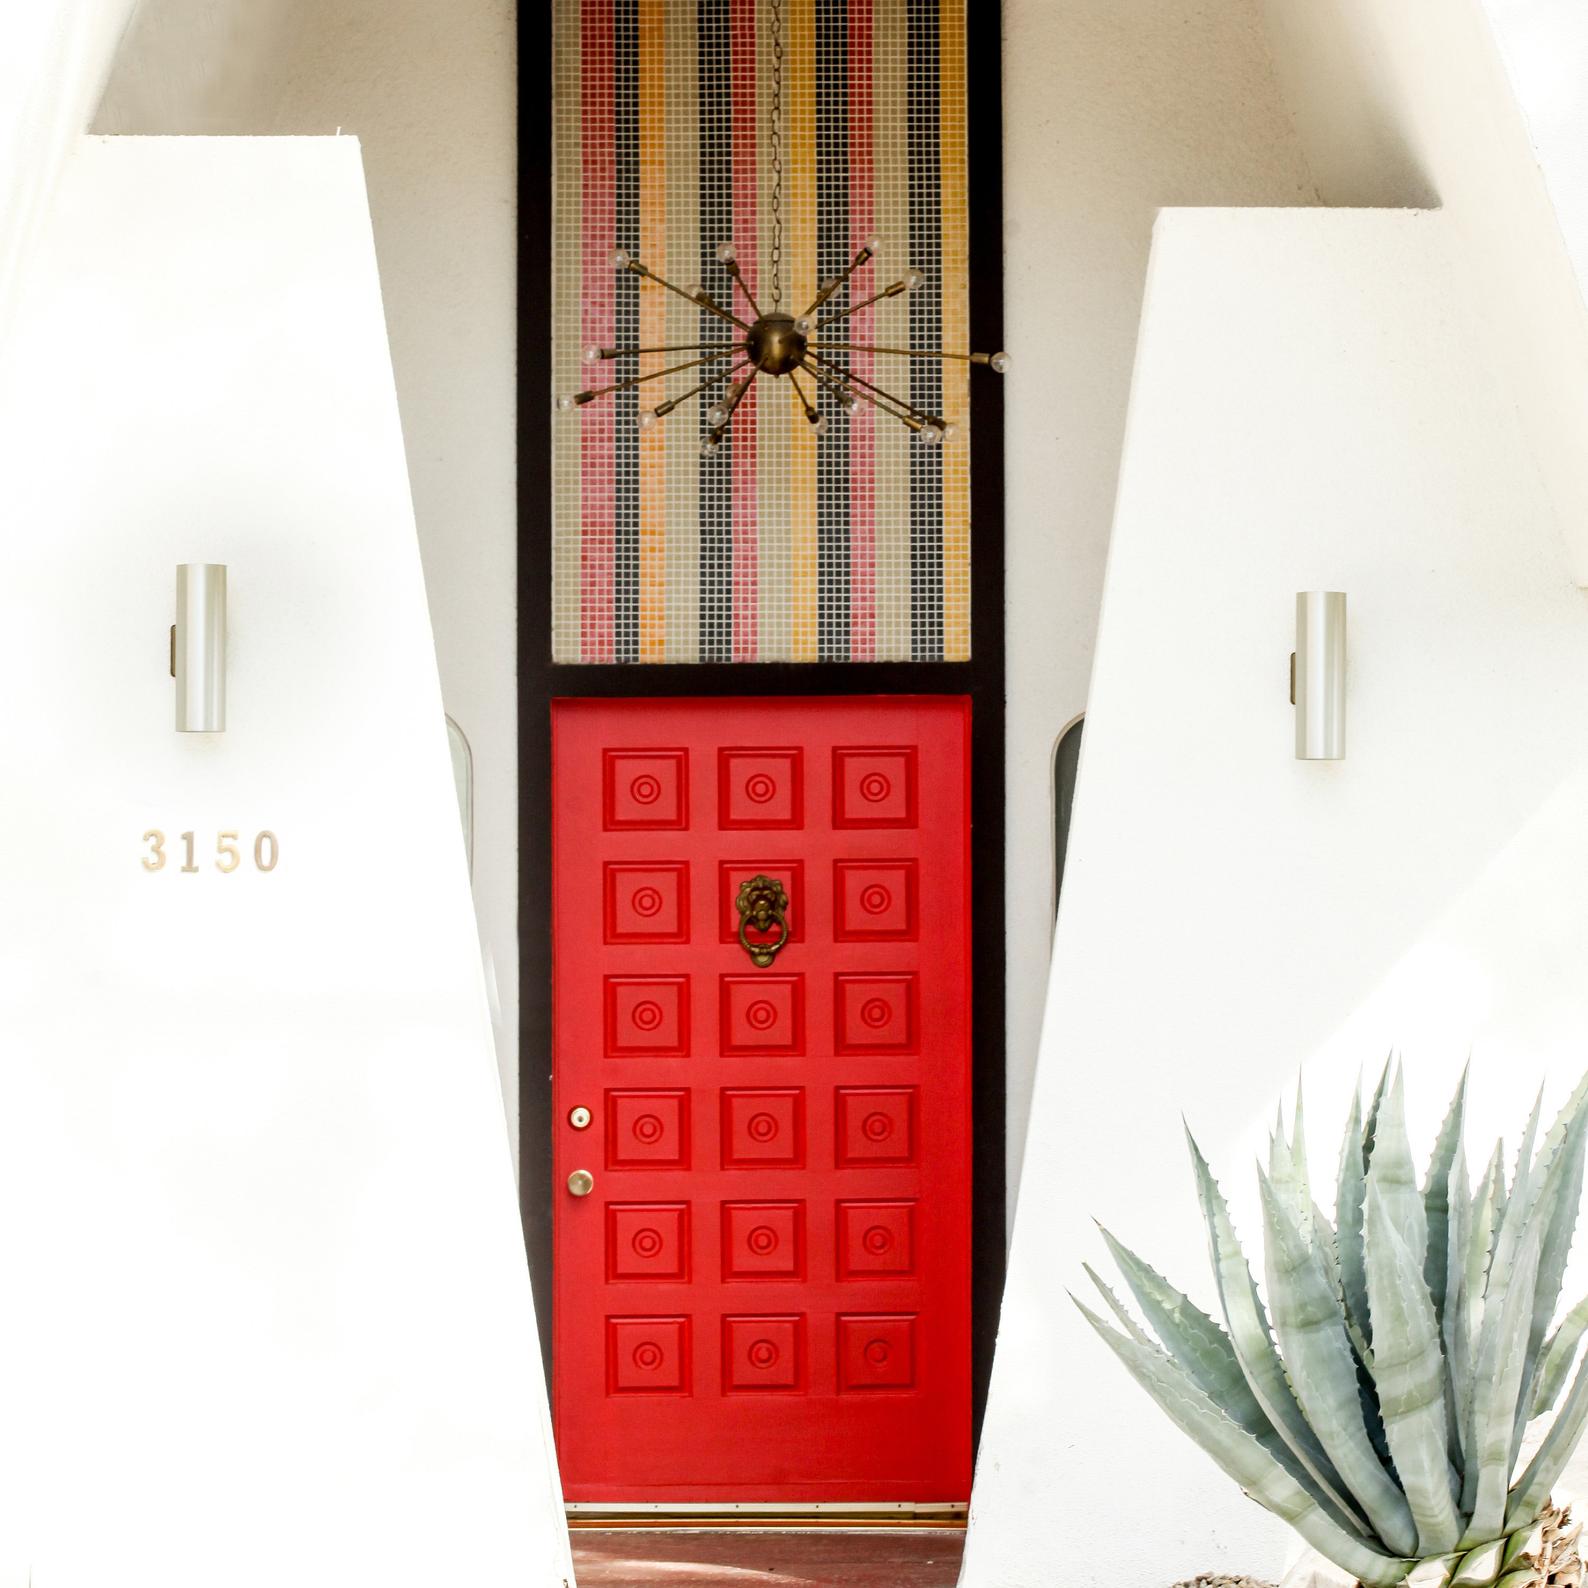 Doors of Palm Springs Photograph by Kelly Segré - Red Verona Door of Palm Springs - Destination PSP